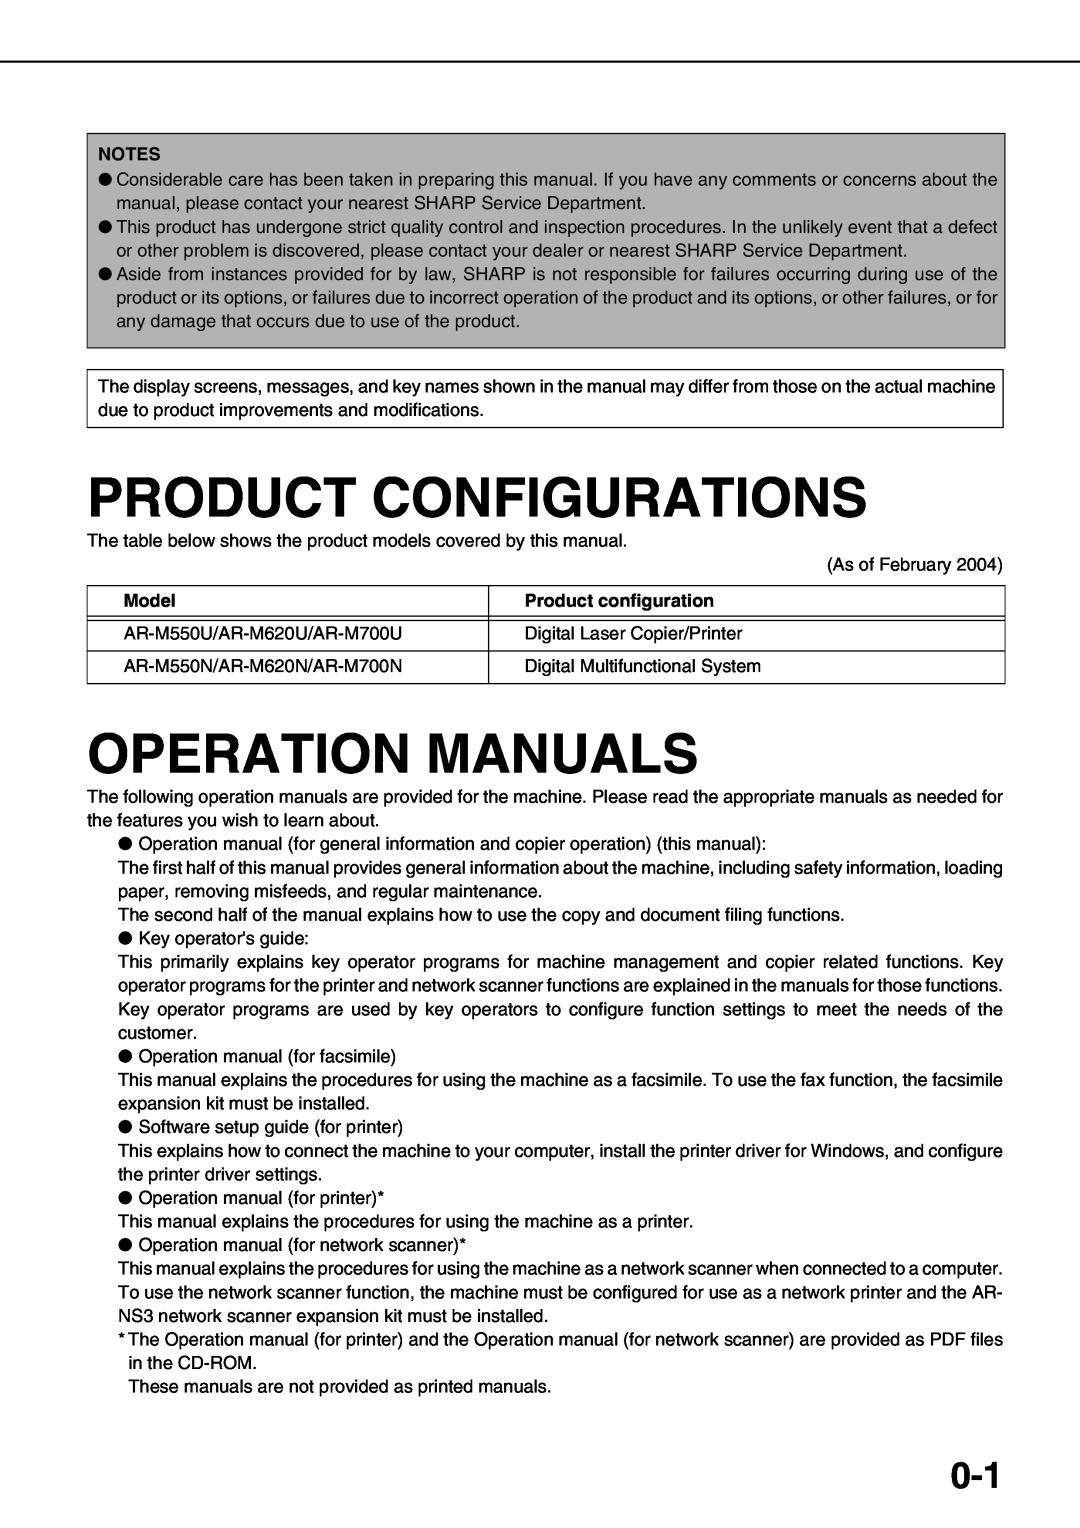 Sharp AR-M620U, AR-M700U, AR-M550N, AR-M620N Product Configurations, Operation Manuals, Model, Product configuration 